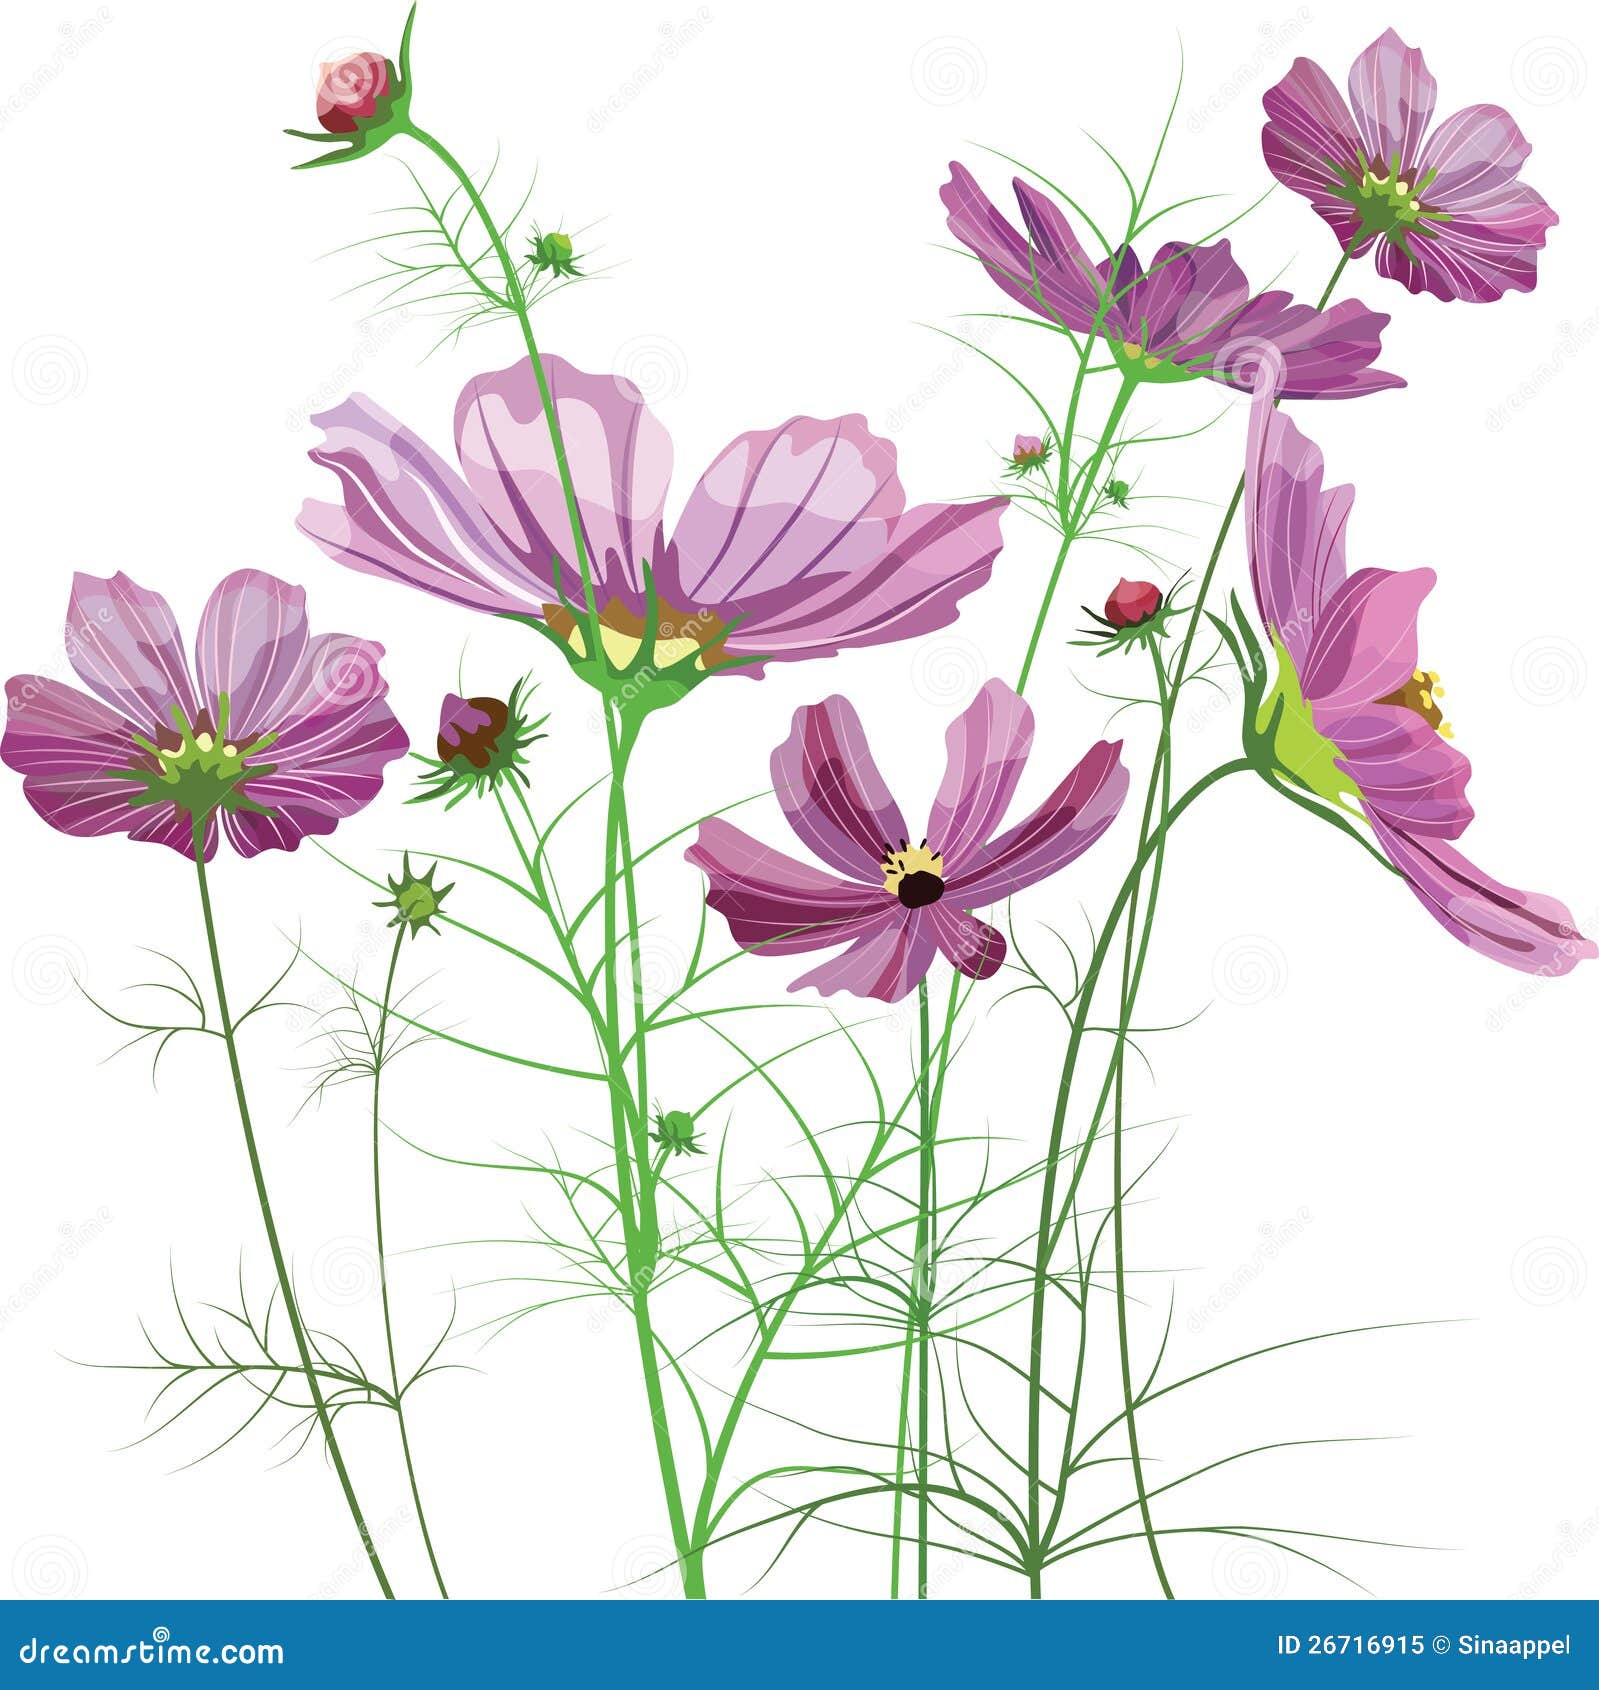 clipart of cosmos flower - photo #30